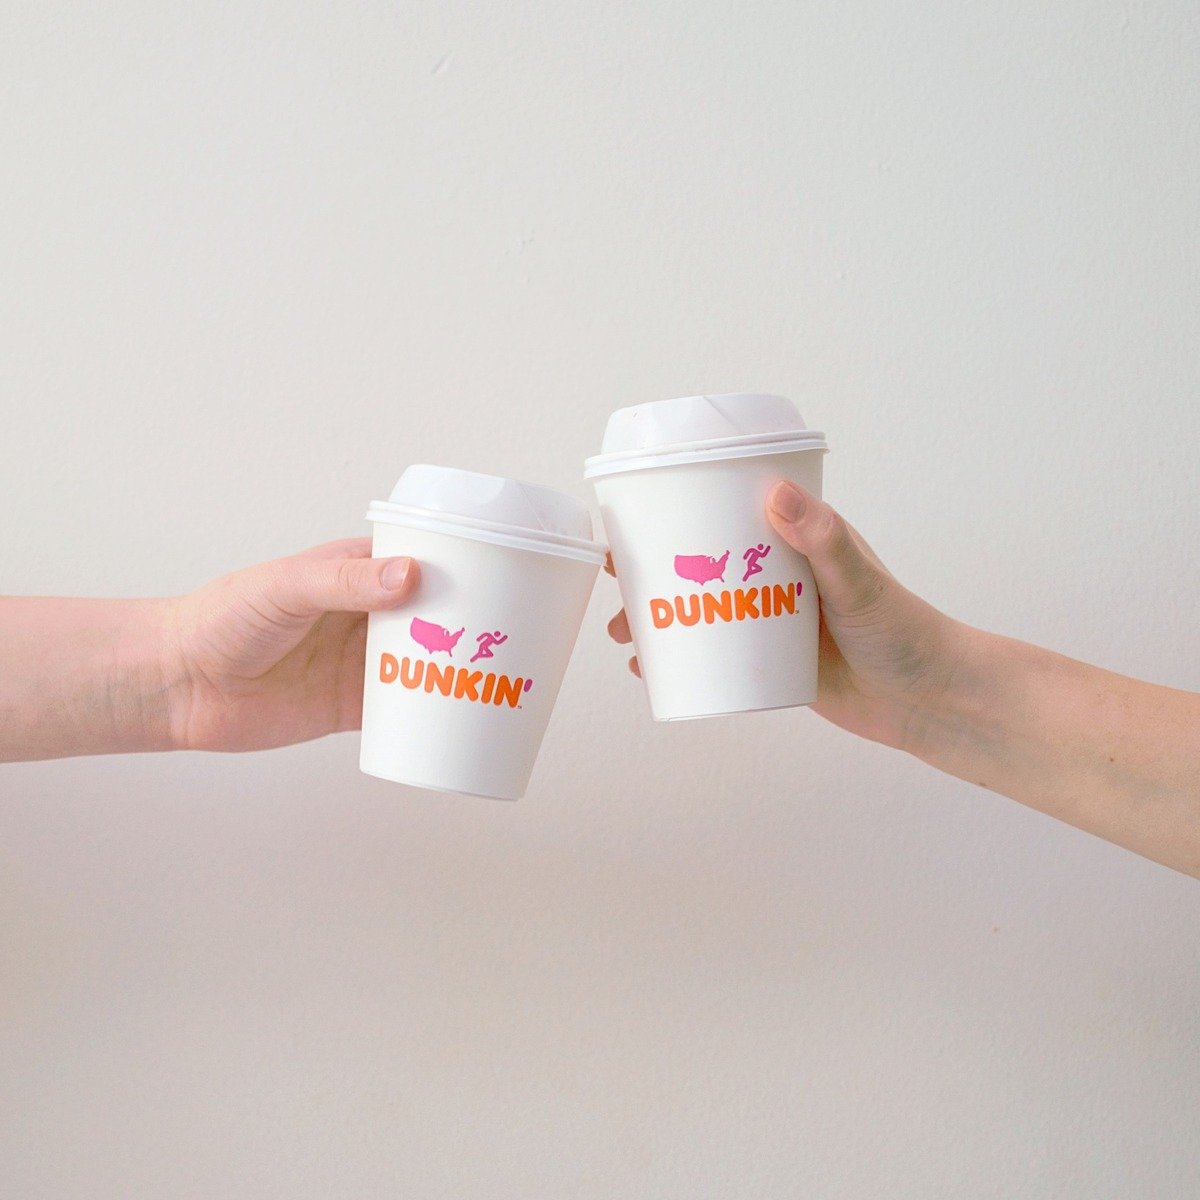 two people holding dunkin donuts paper cups together